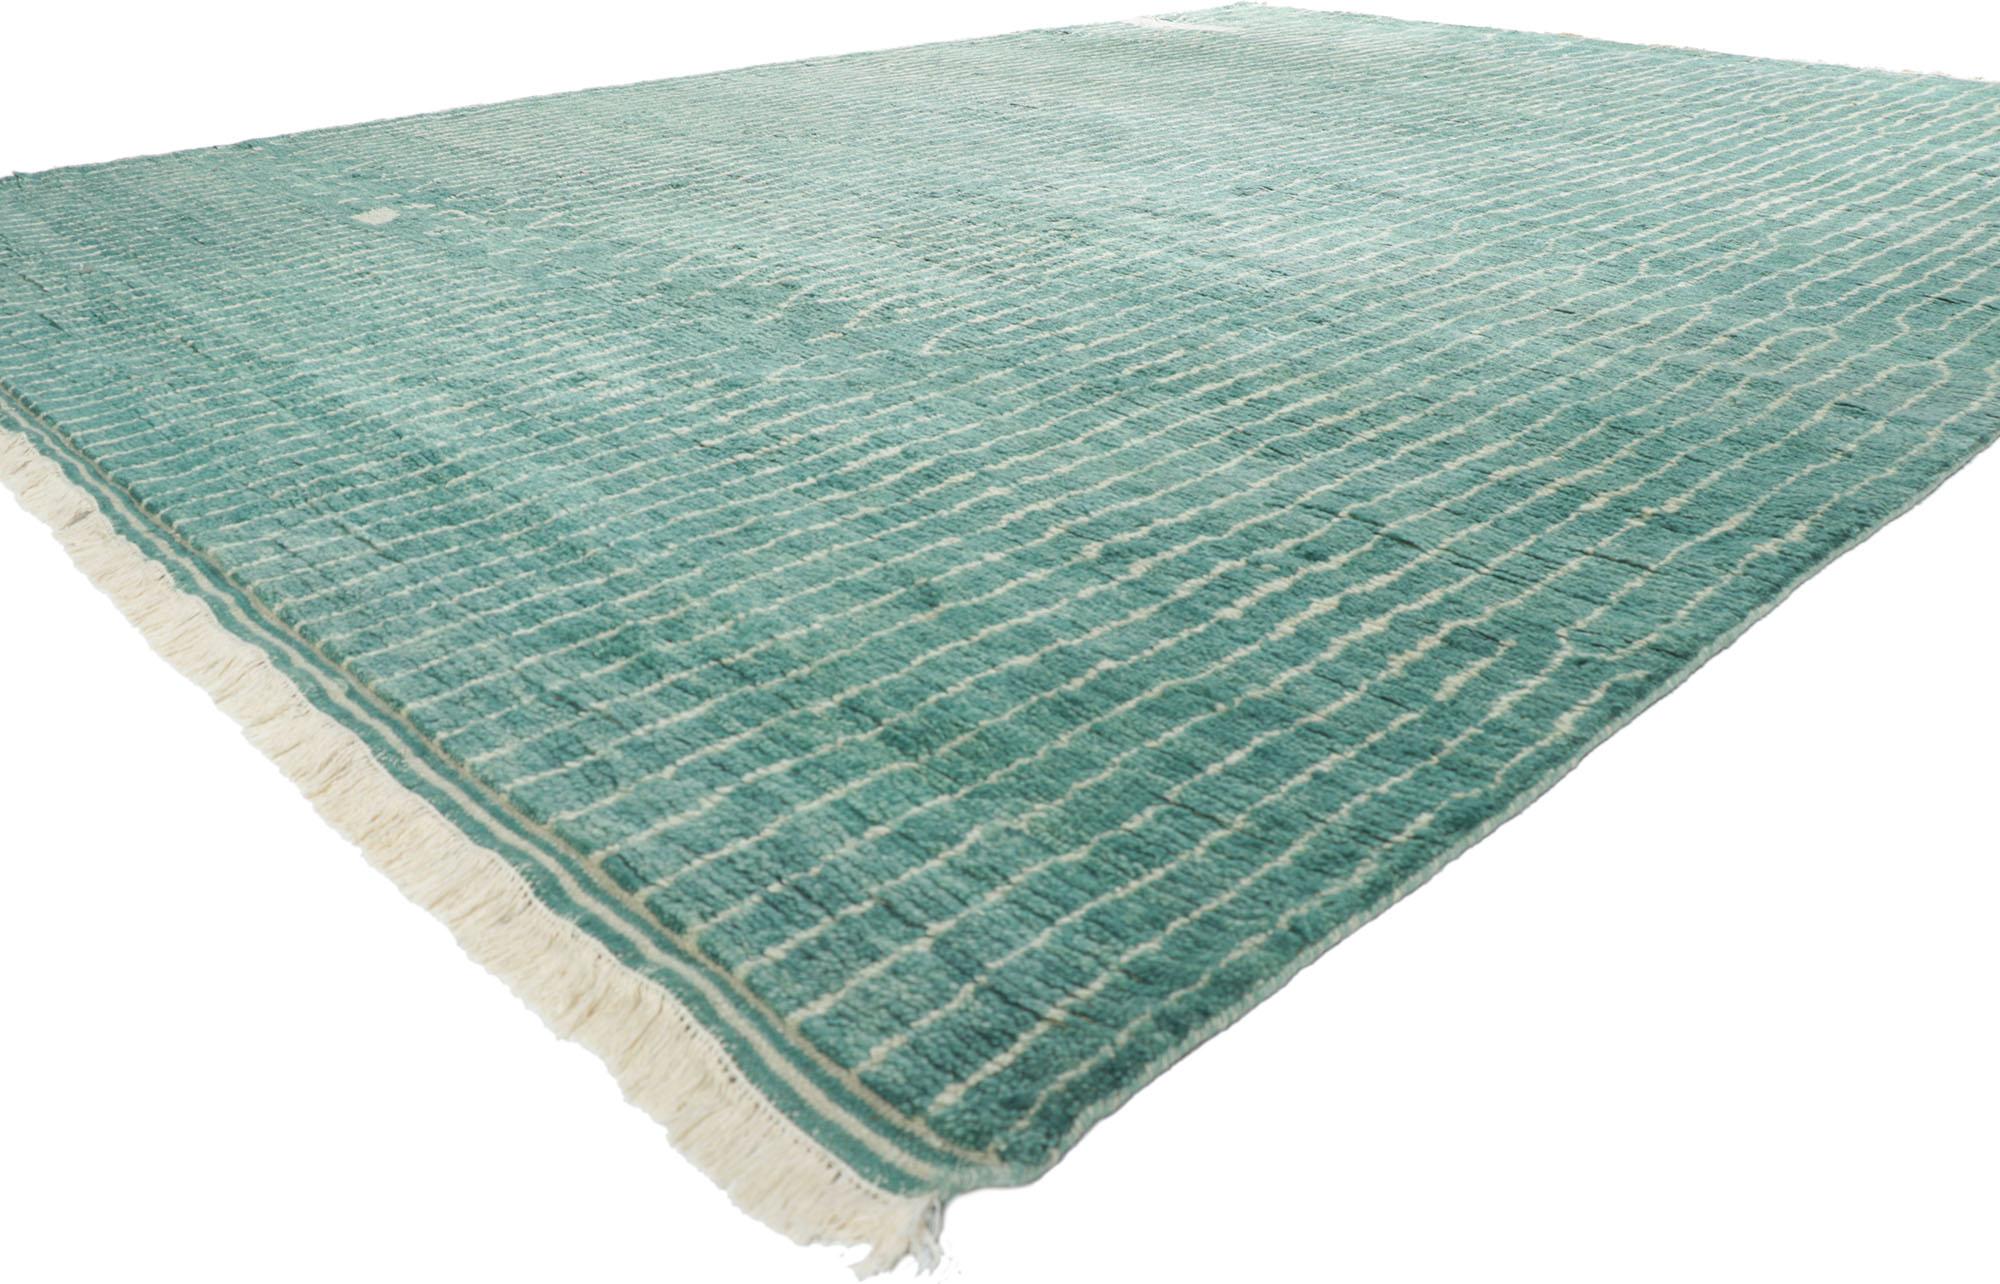 30773 New Contemporary Moroccan Style Rug 10'02 x 13'07. Channeling a coastal cottage with colors reminiscence of sea glass and weathered wood, this hand-knotted wool contemporary Moroccan style rug is a captivating vision of woven beauty. The